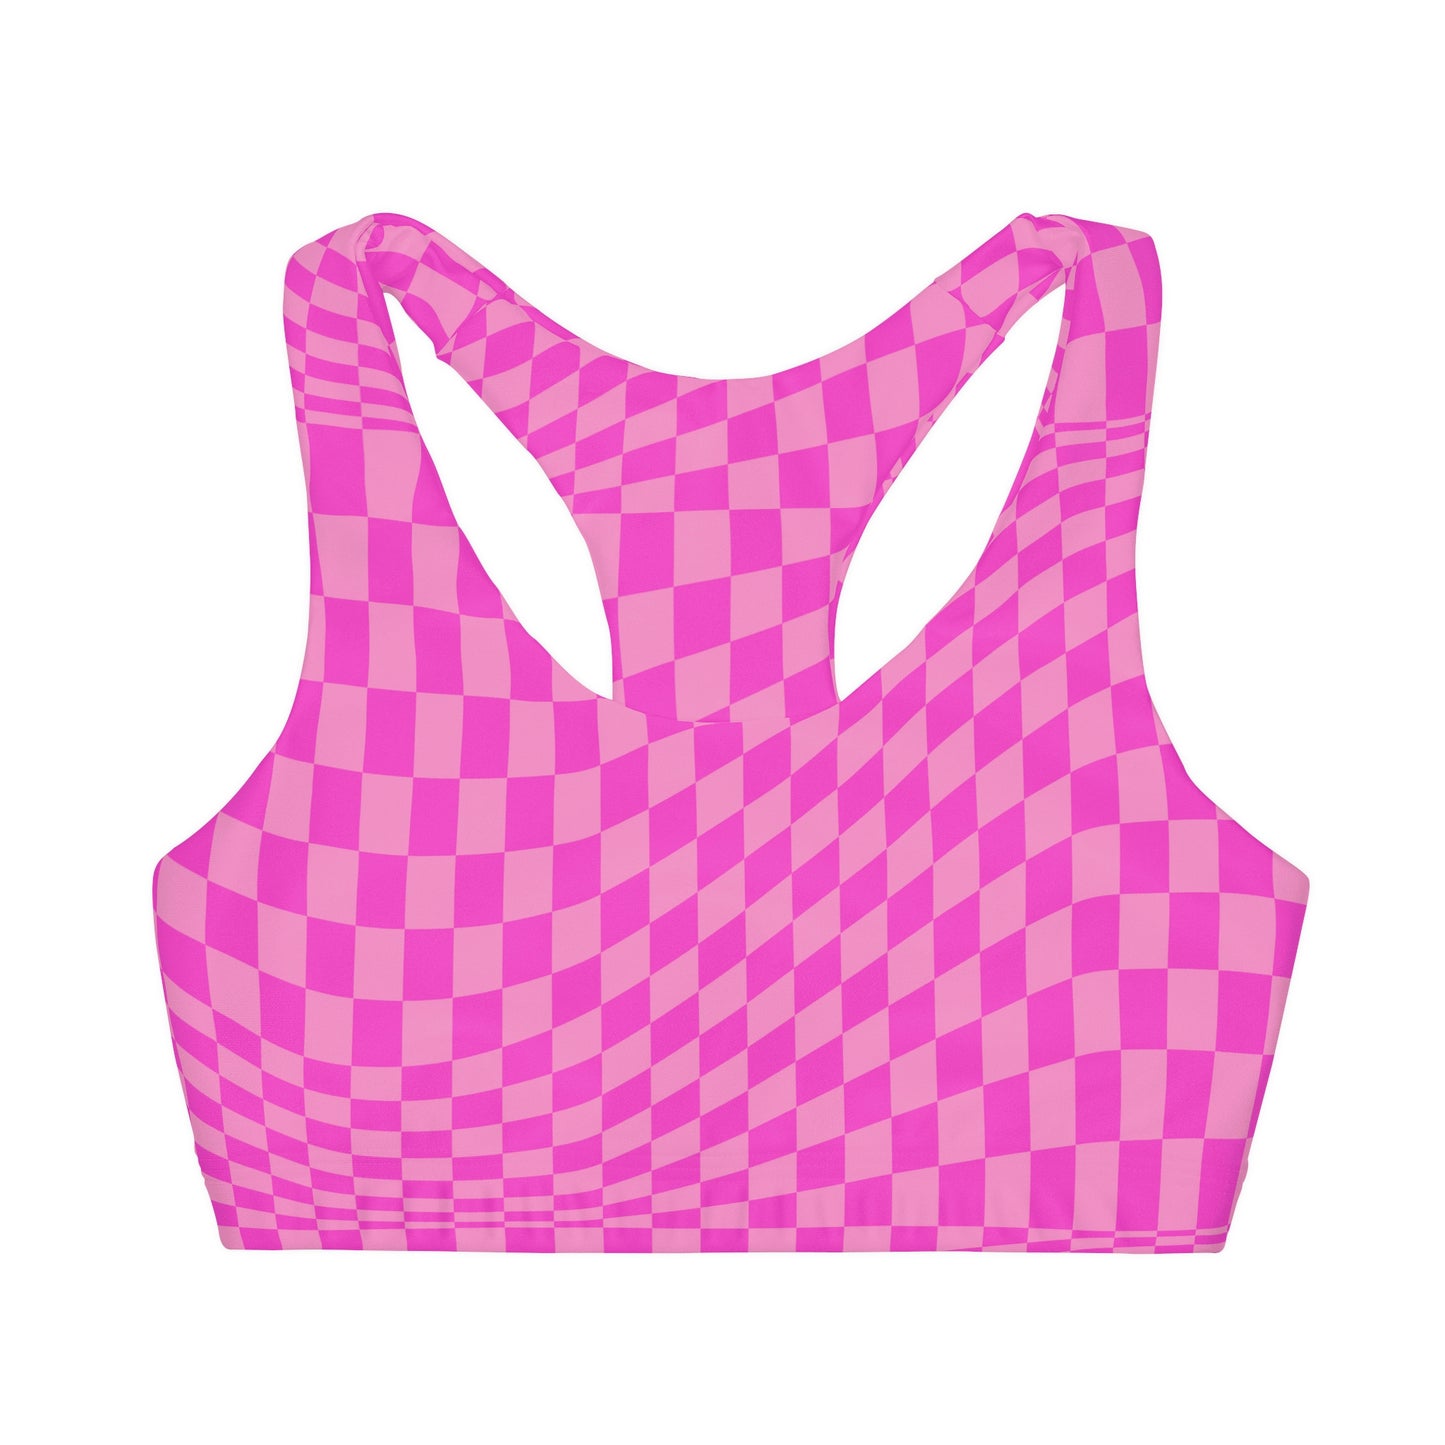 Load image into Gallery viewer, Pink Checkerboard Girls Sports Bra
